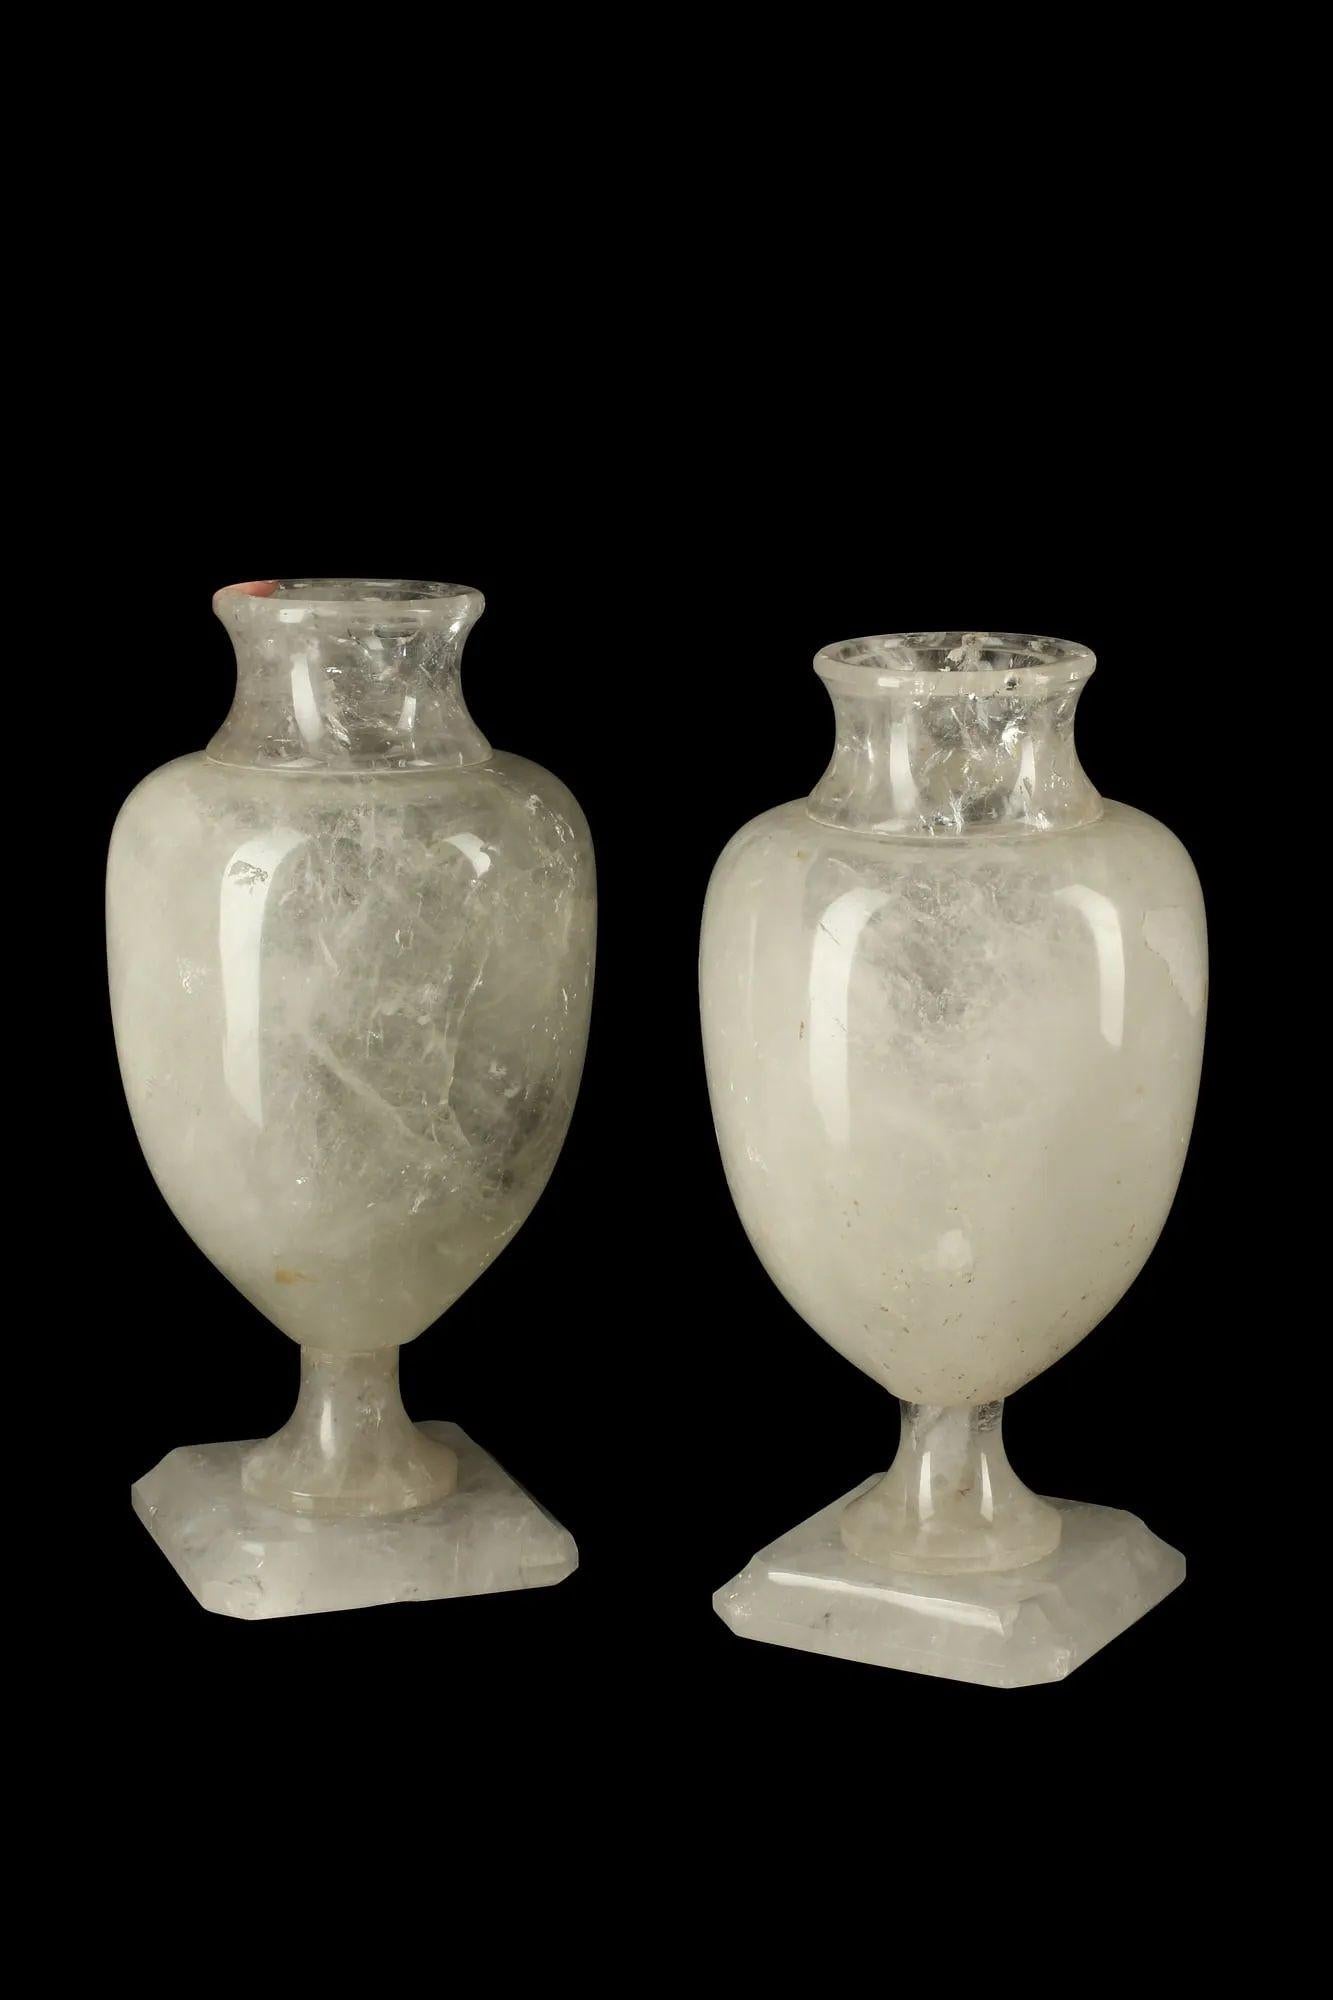 Pair of Neoclassical style rock carved rock crystal urns, made in Italy in the 20th Century.
Dimensions:
14